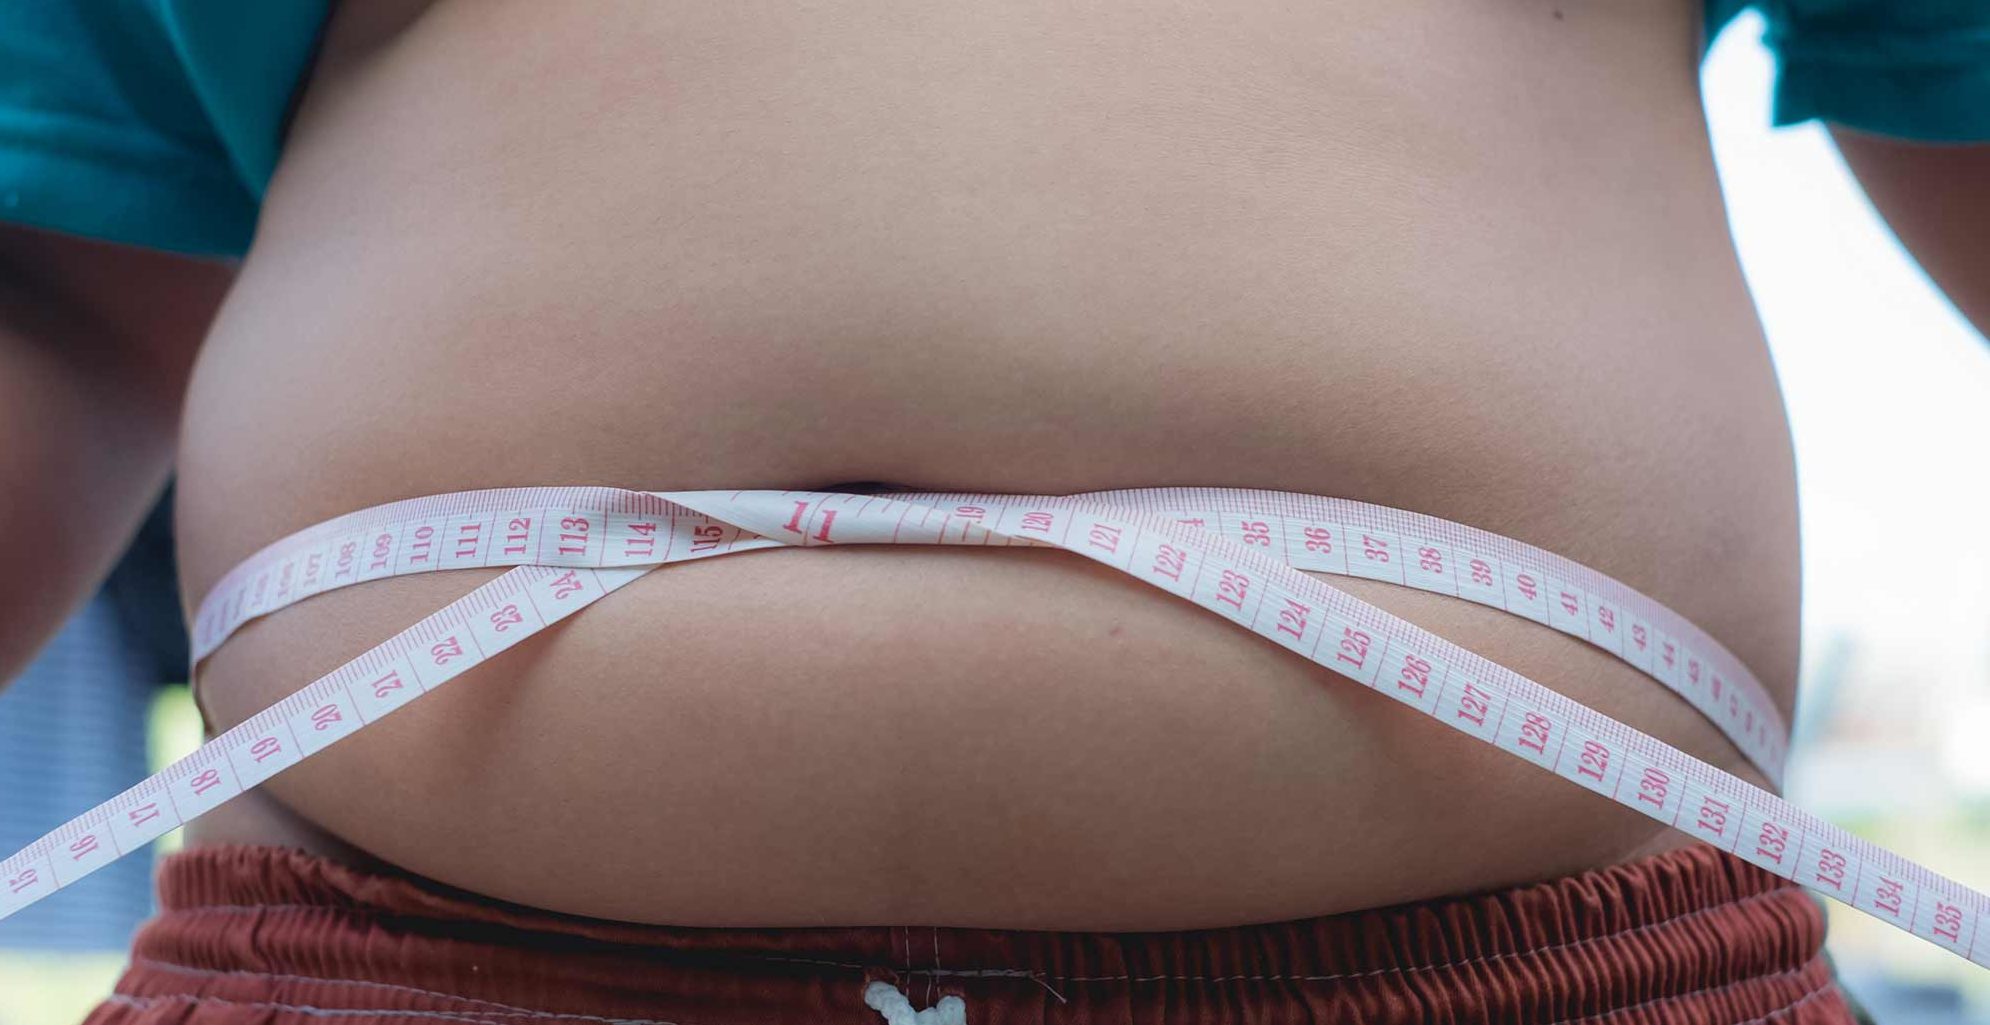 A new report has predicted that halving childhood obesity by 2030 could save the NHS £37 billion